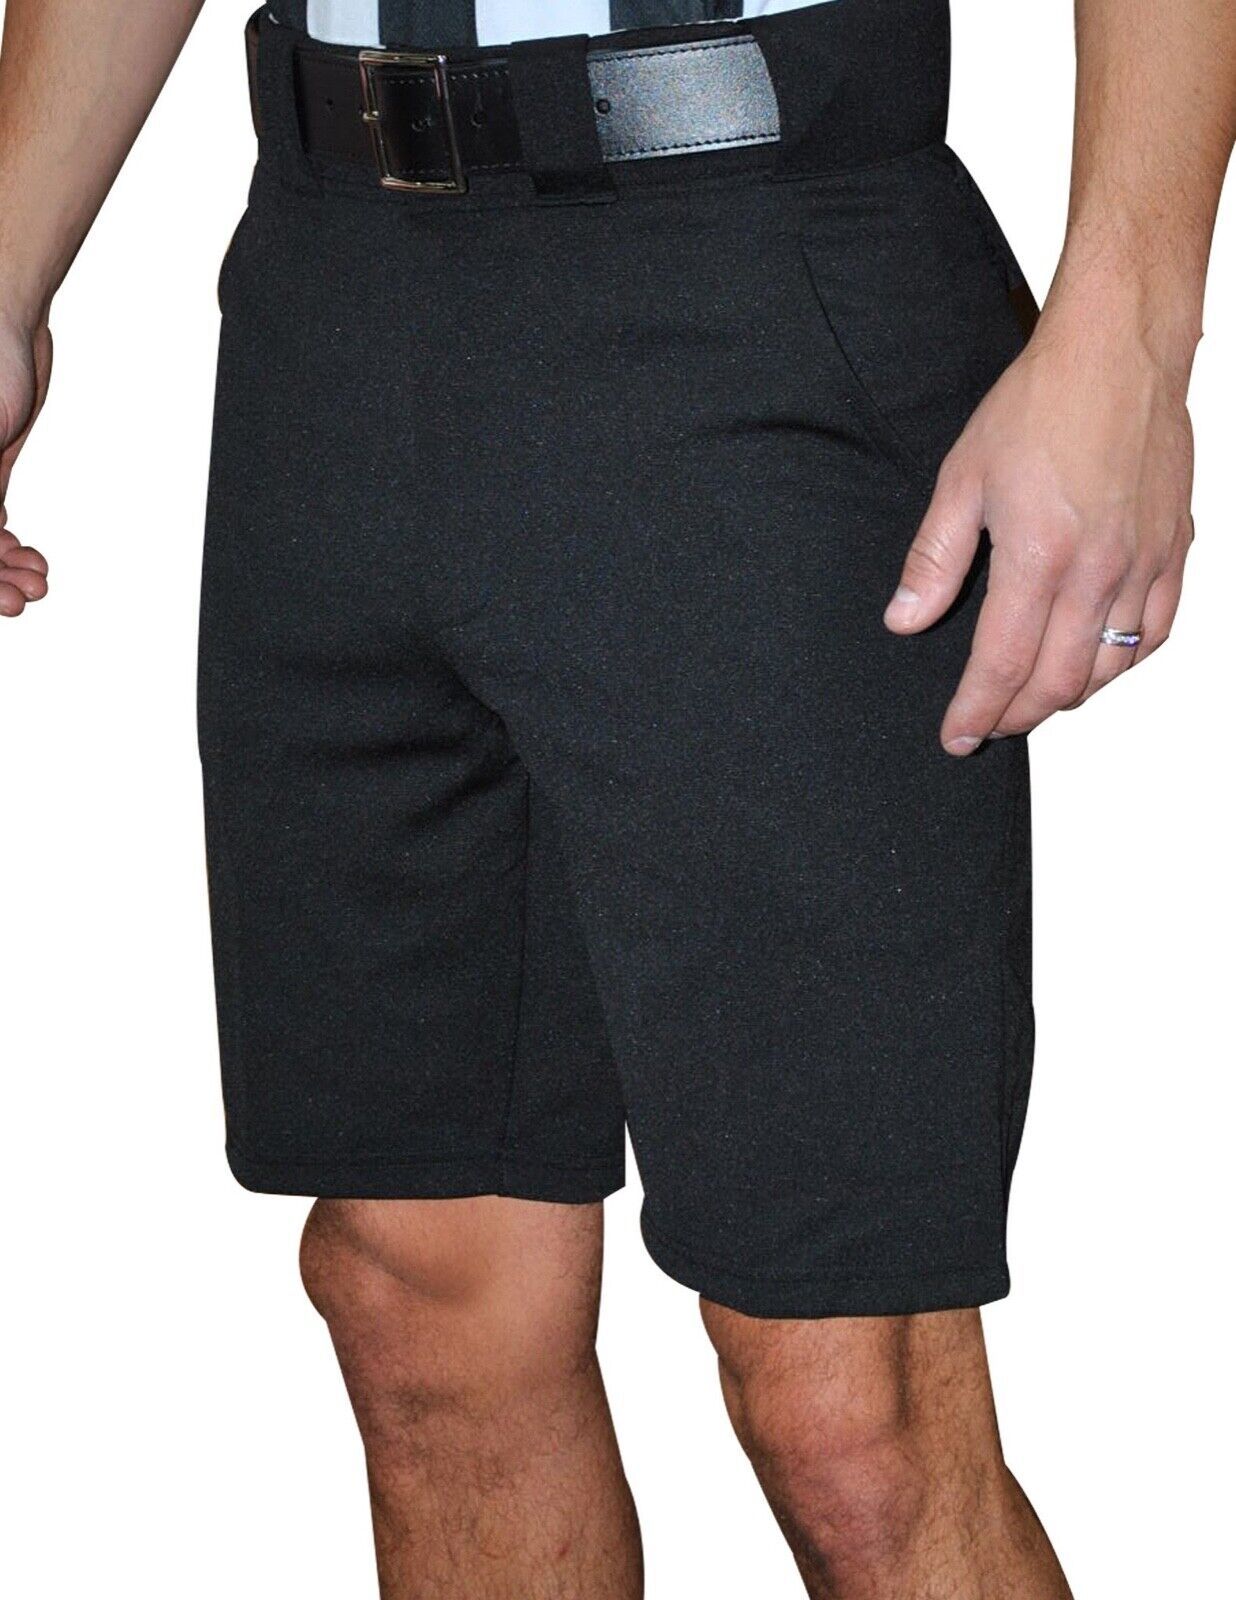 Primary image for Smitty | FBS-171 | Football & Lacrosse Referee Shorts | Solid Black | Polyester